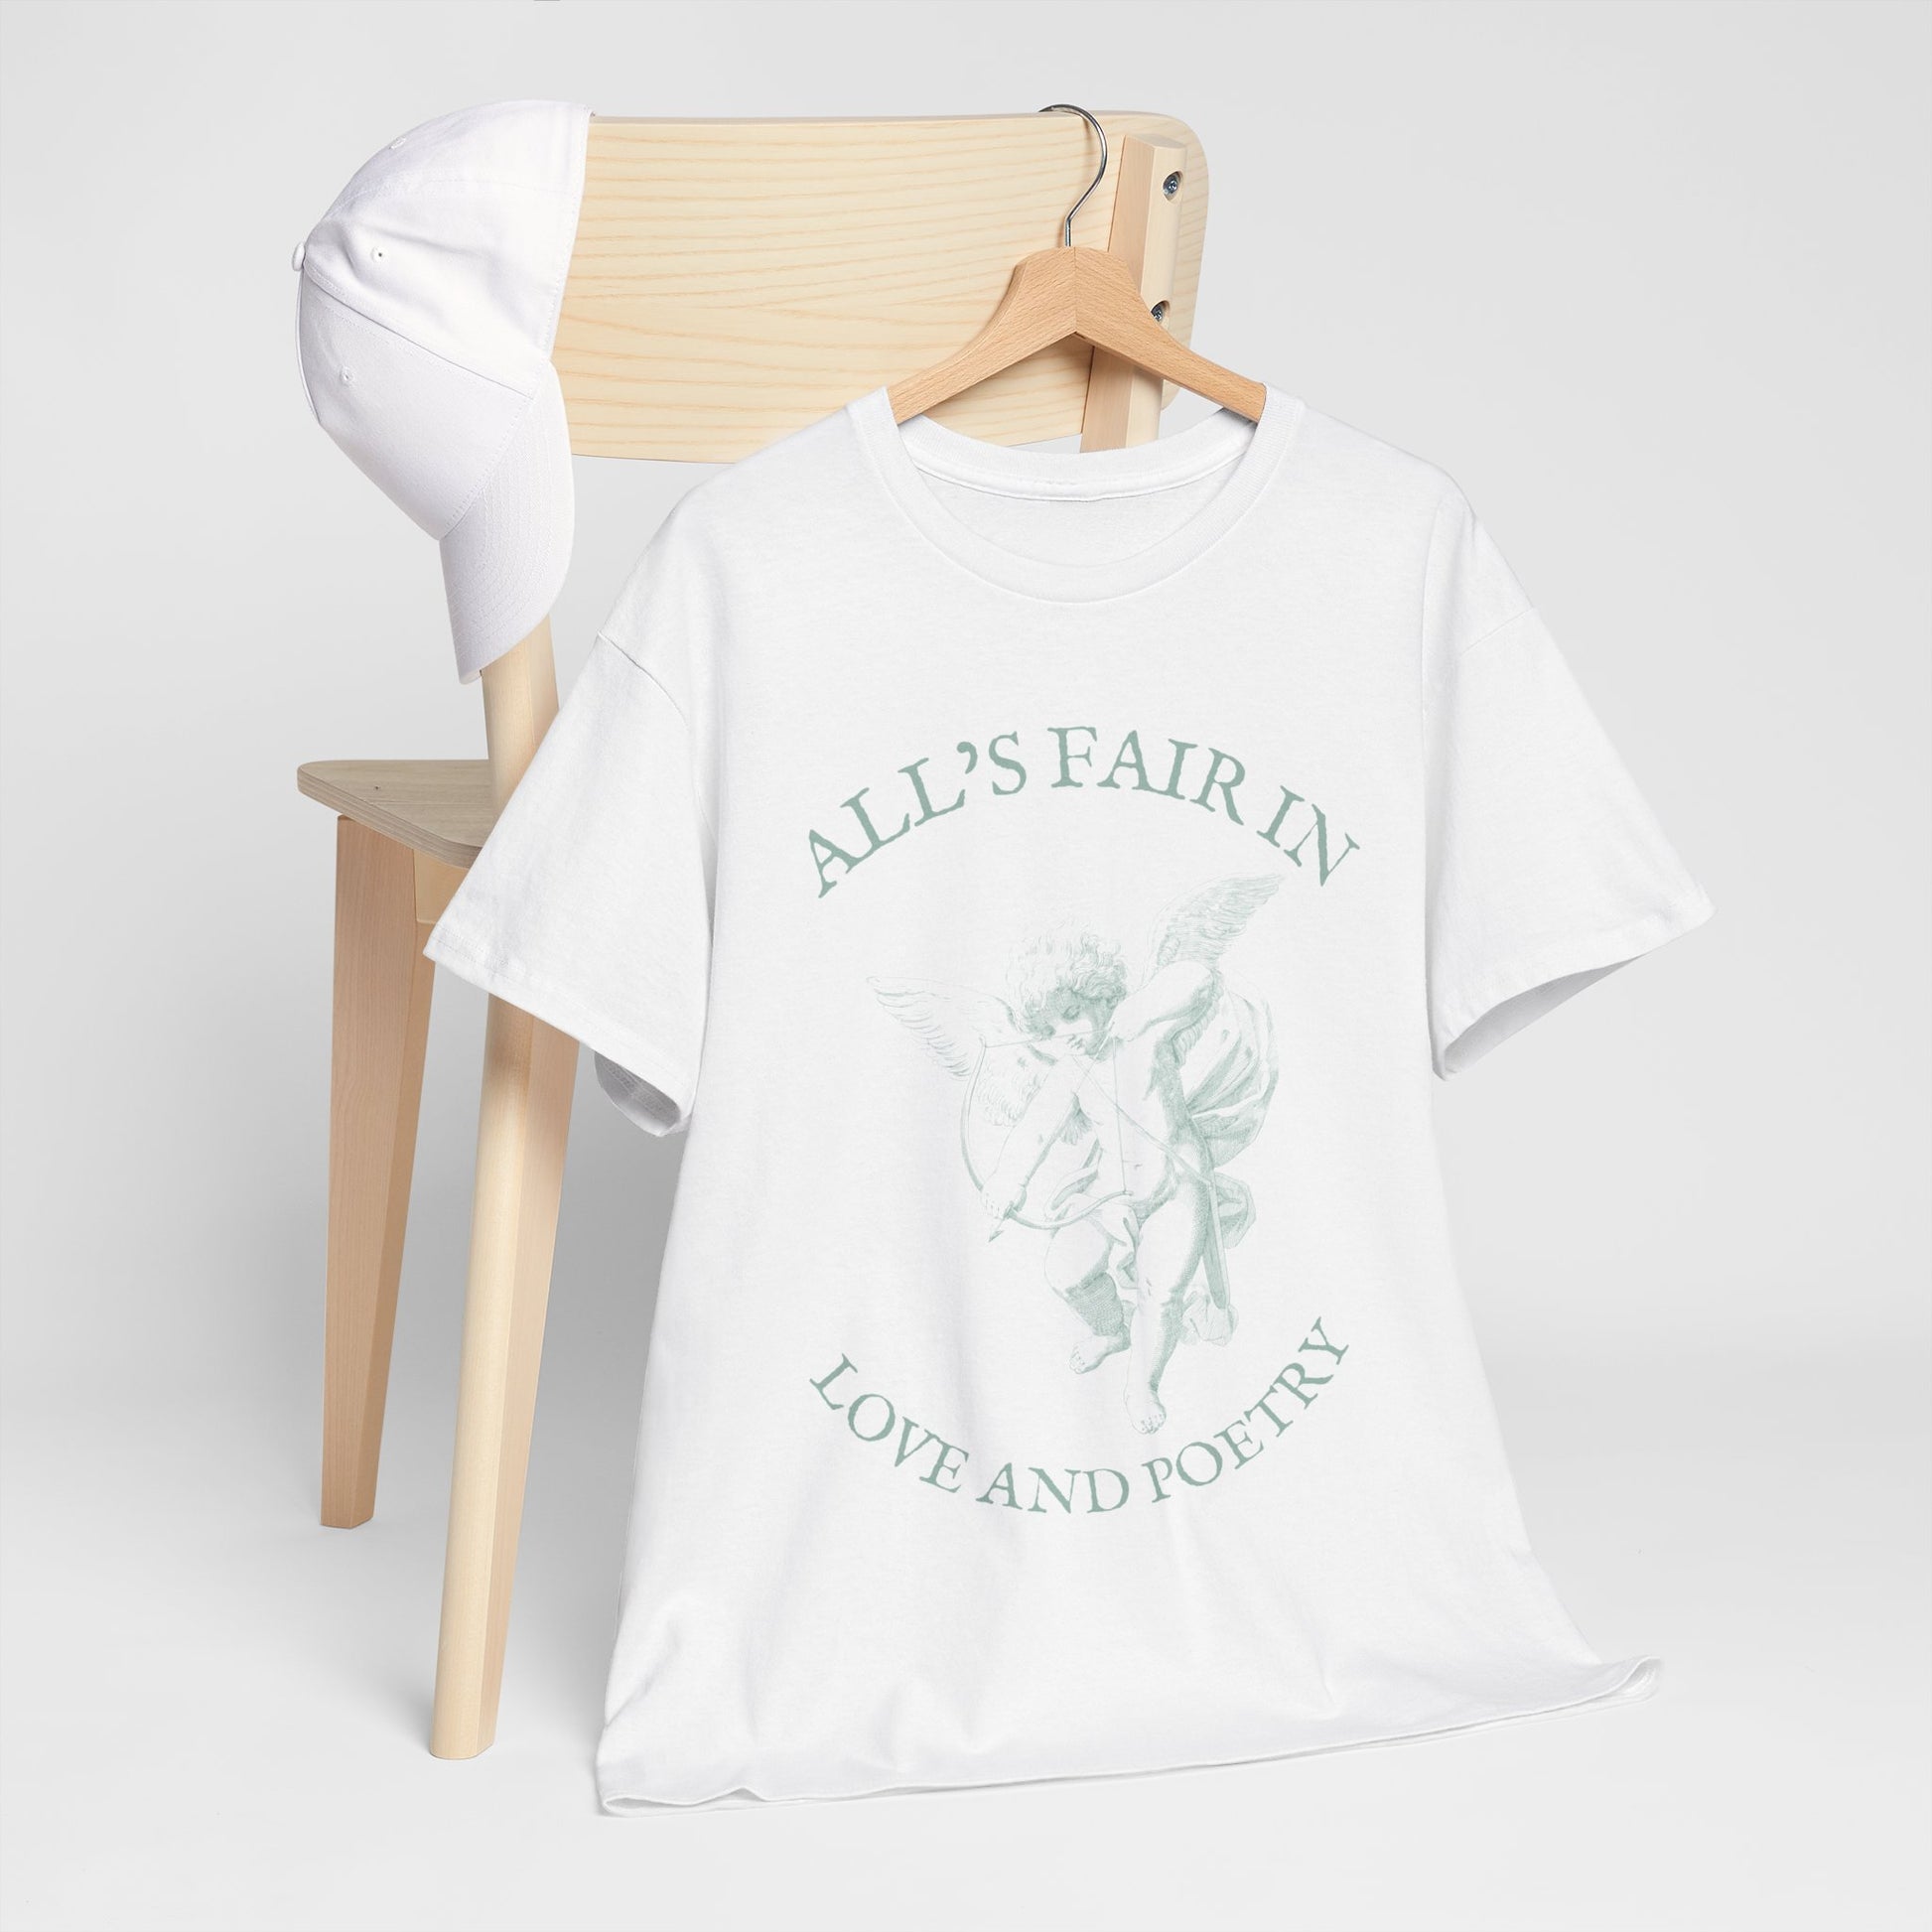 All's Fair in Love and Poetry T-Shirt